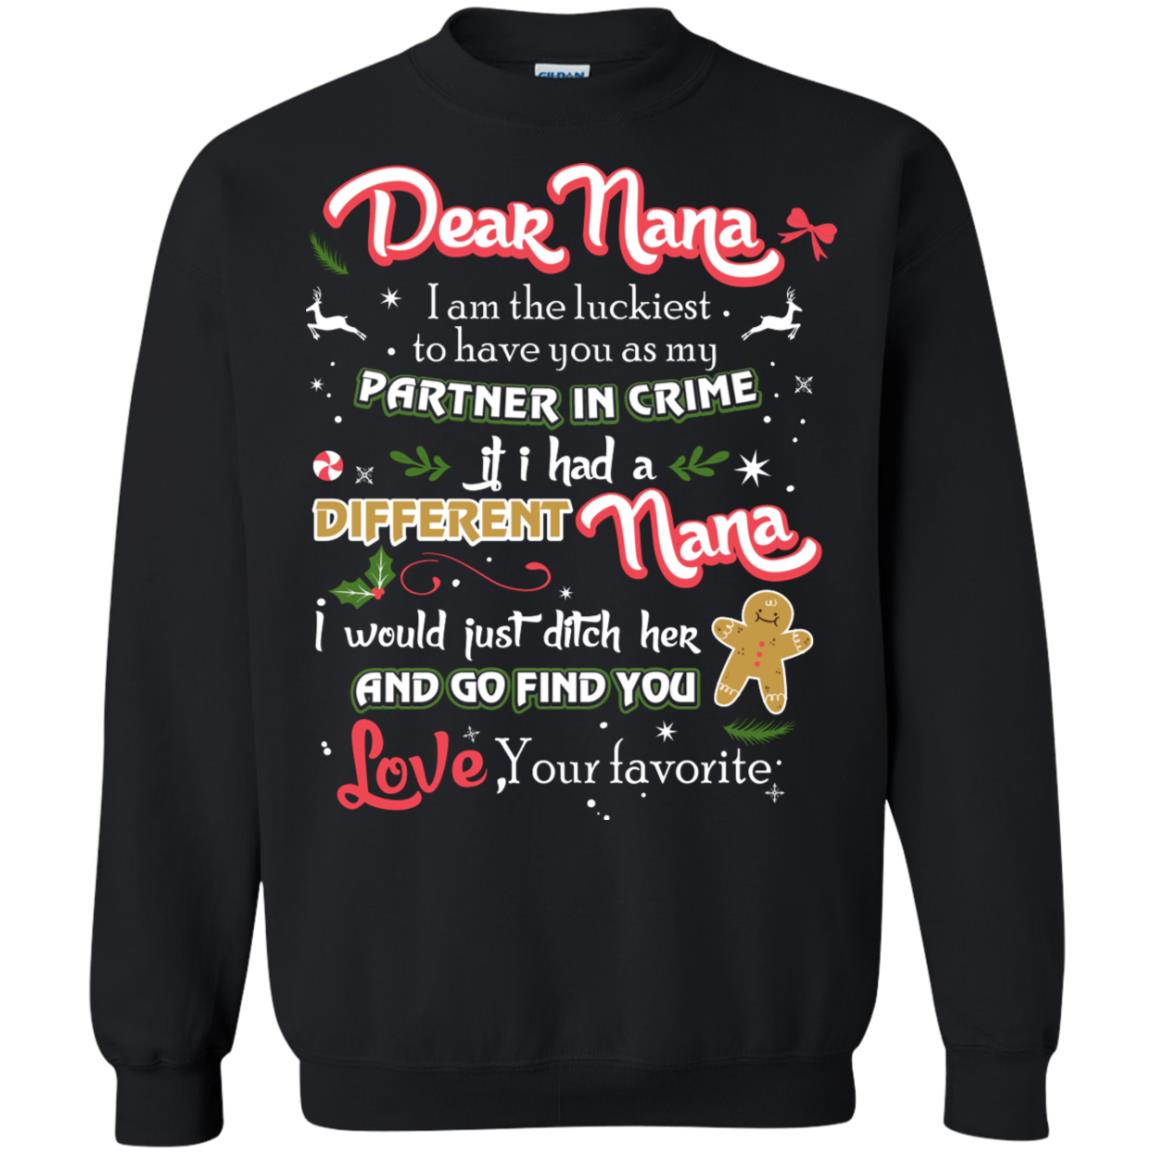 Dear Nana I Am The Luckiest To Have You As My Partner In Crime If I Had A Different Nana I Would Just Ditch Her And Go Find You Love Your FavoriteG180 Gildan Crewneck Pullover Sweatshirt 8 oz.